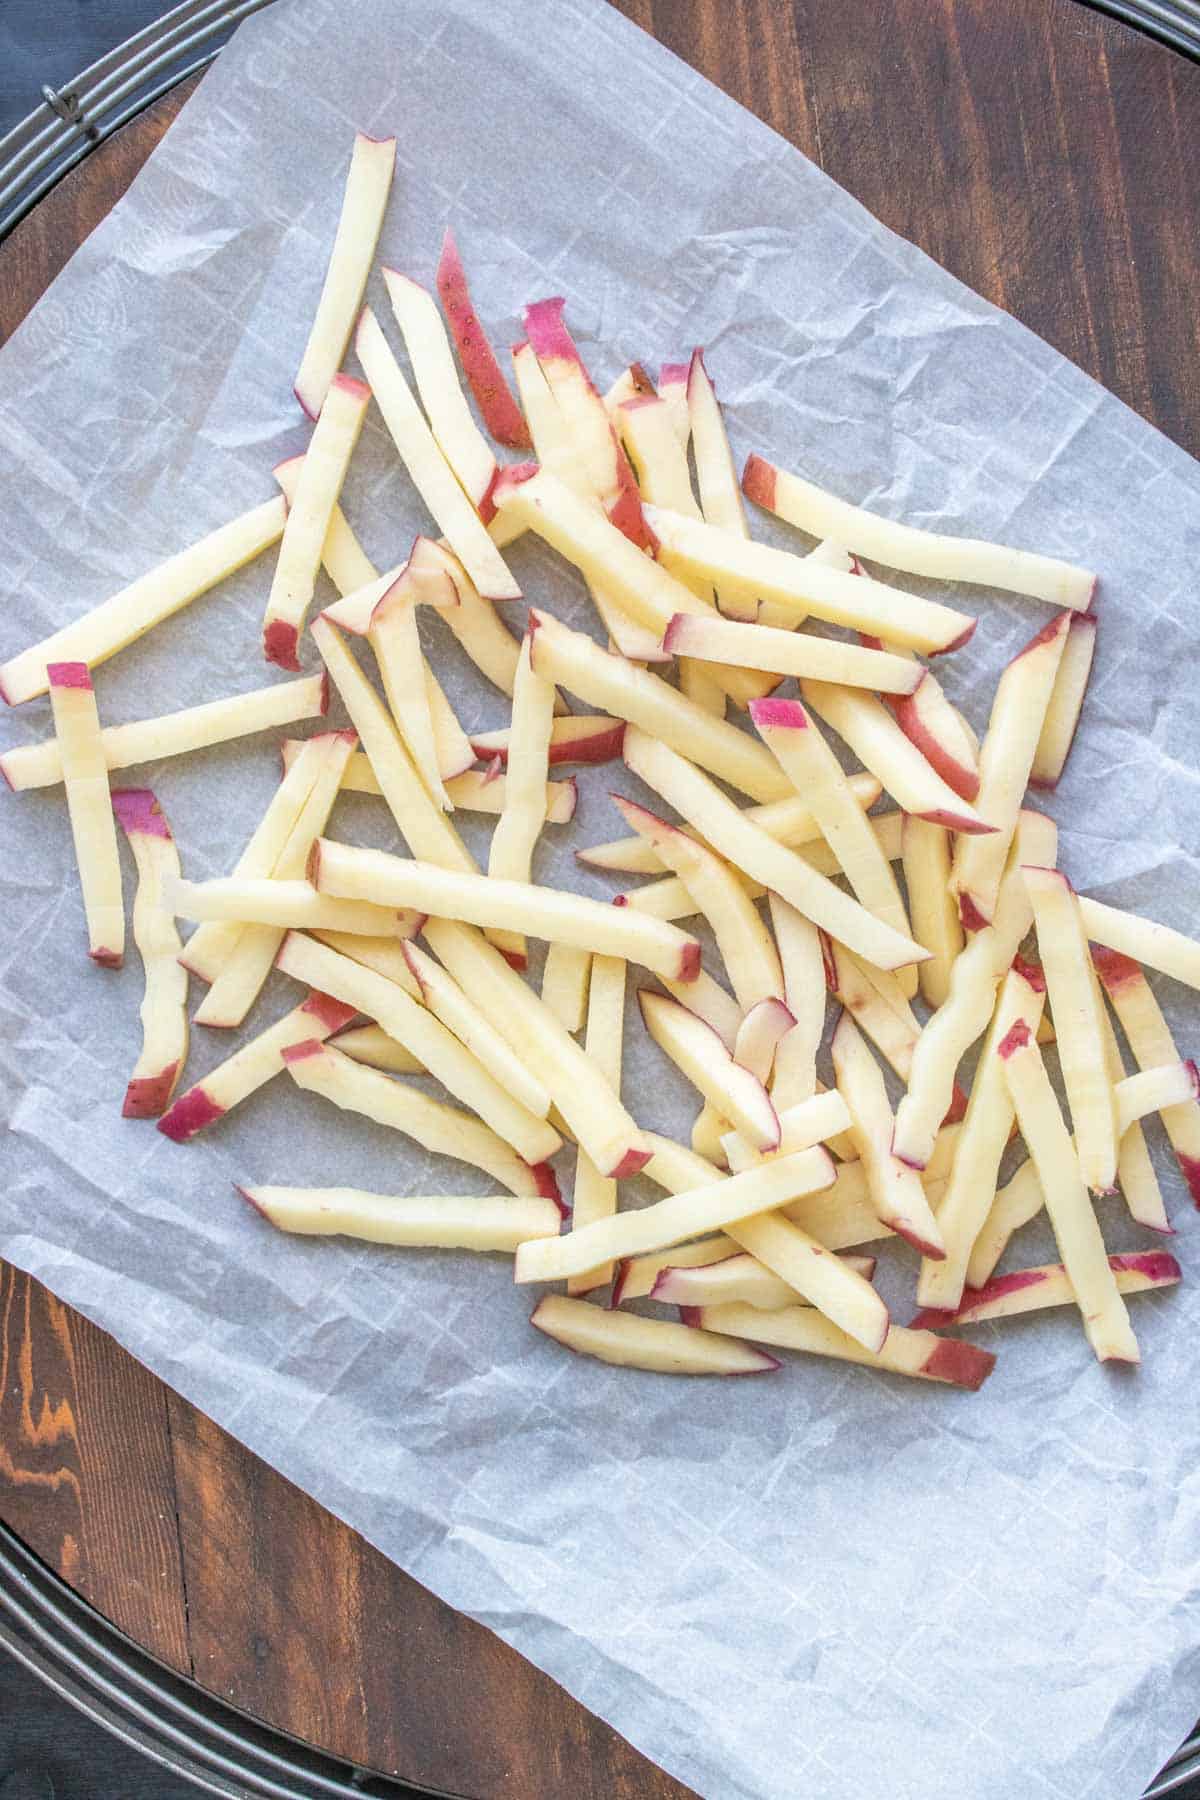 Raw potatoes cut into matchstick slices on a piece of parchment.